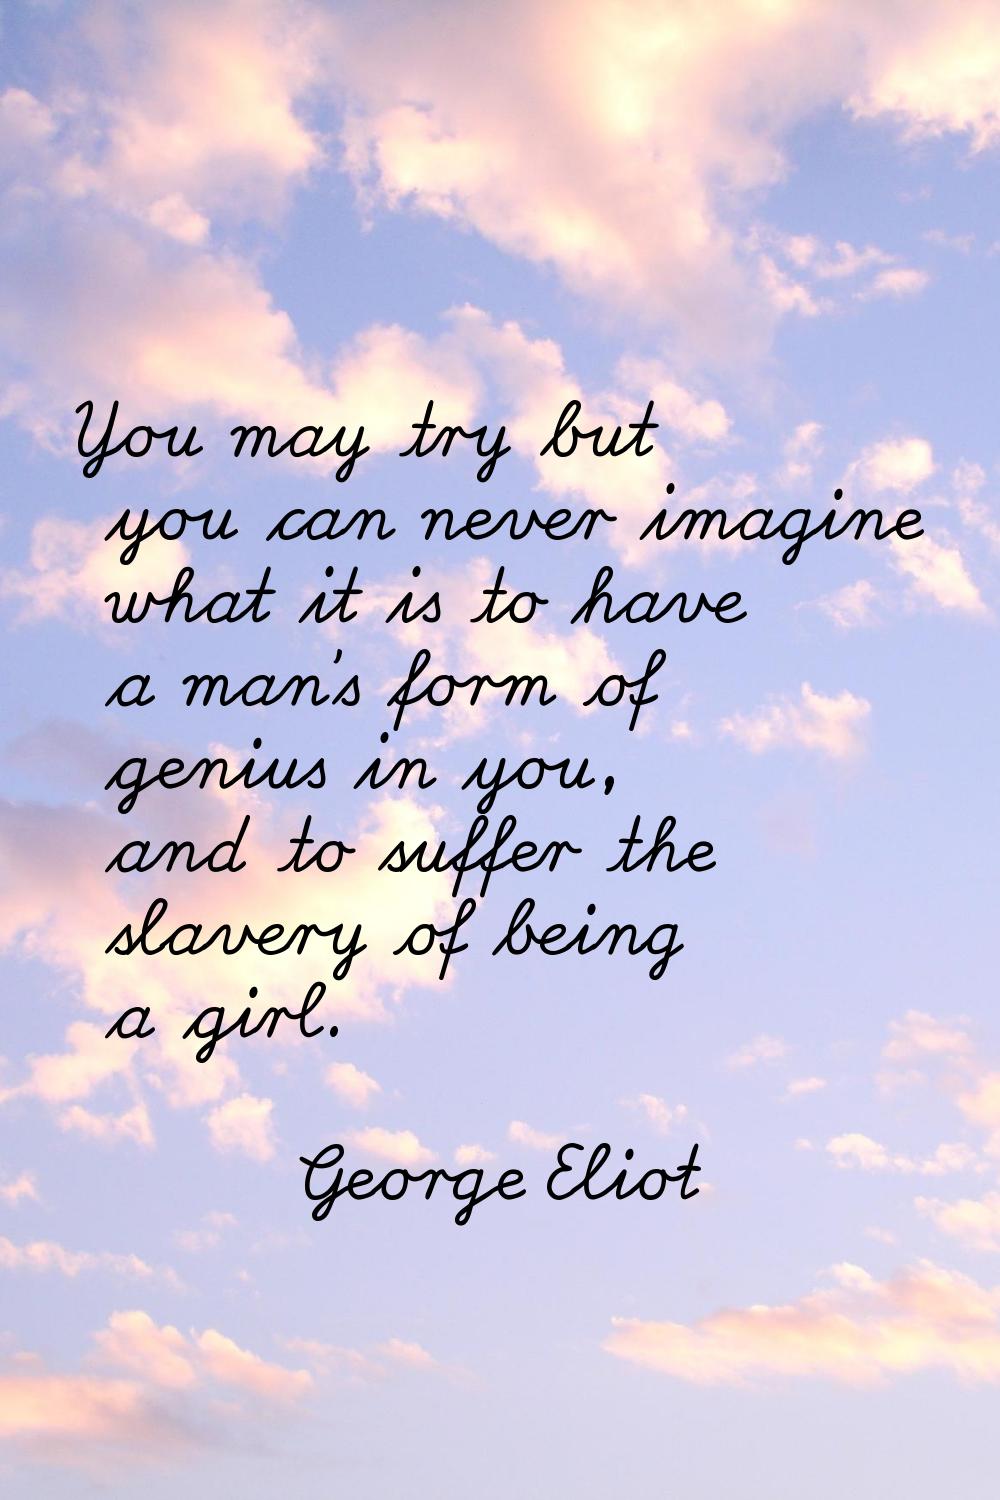 You may try but you can never imagine what it is to have a man's form of genius in you, and to suff